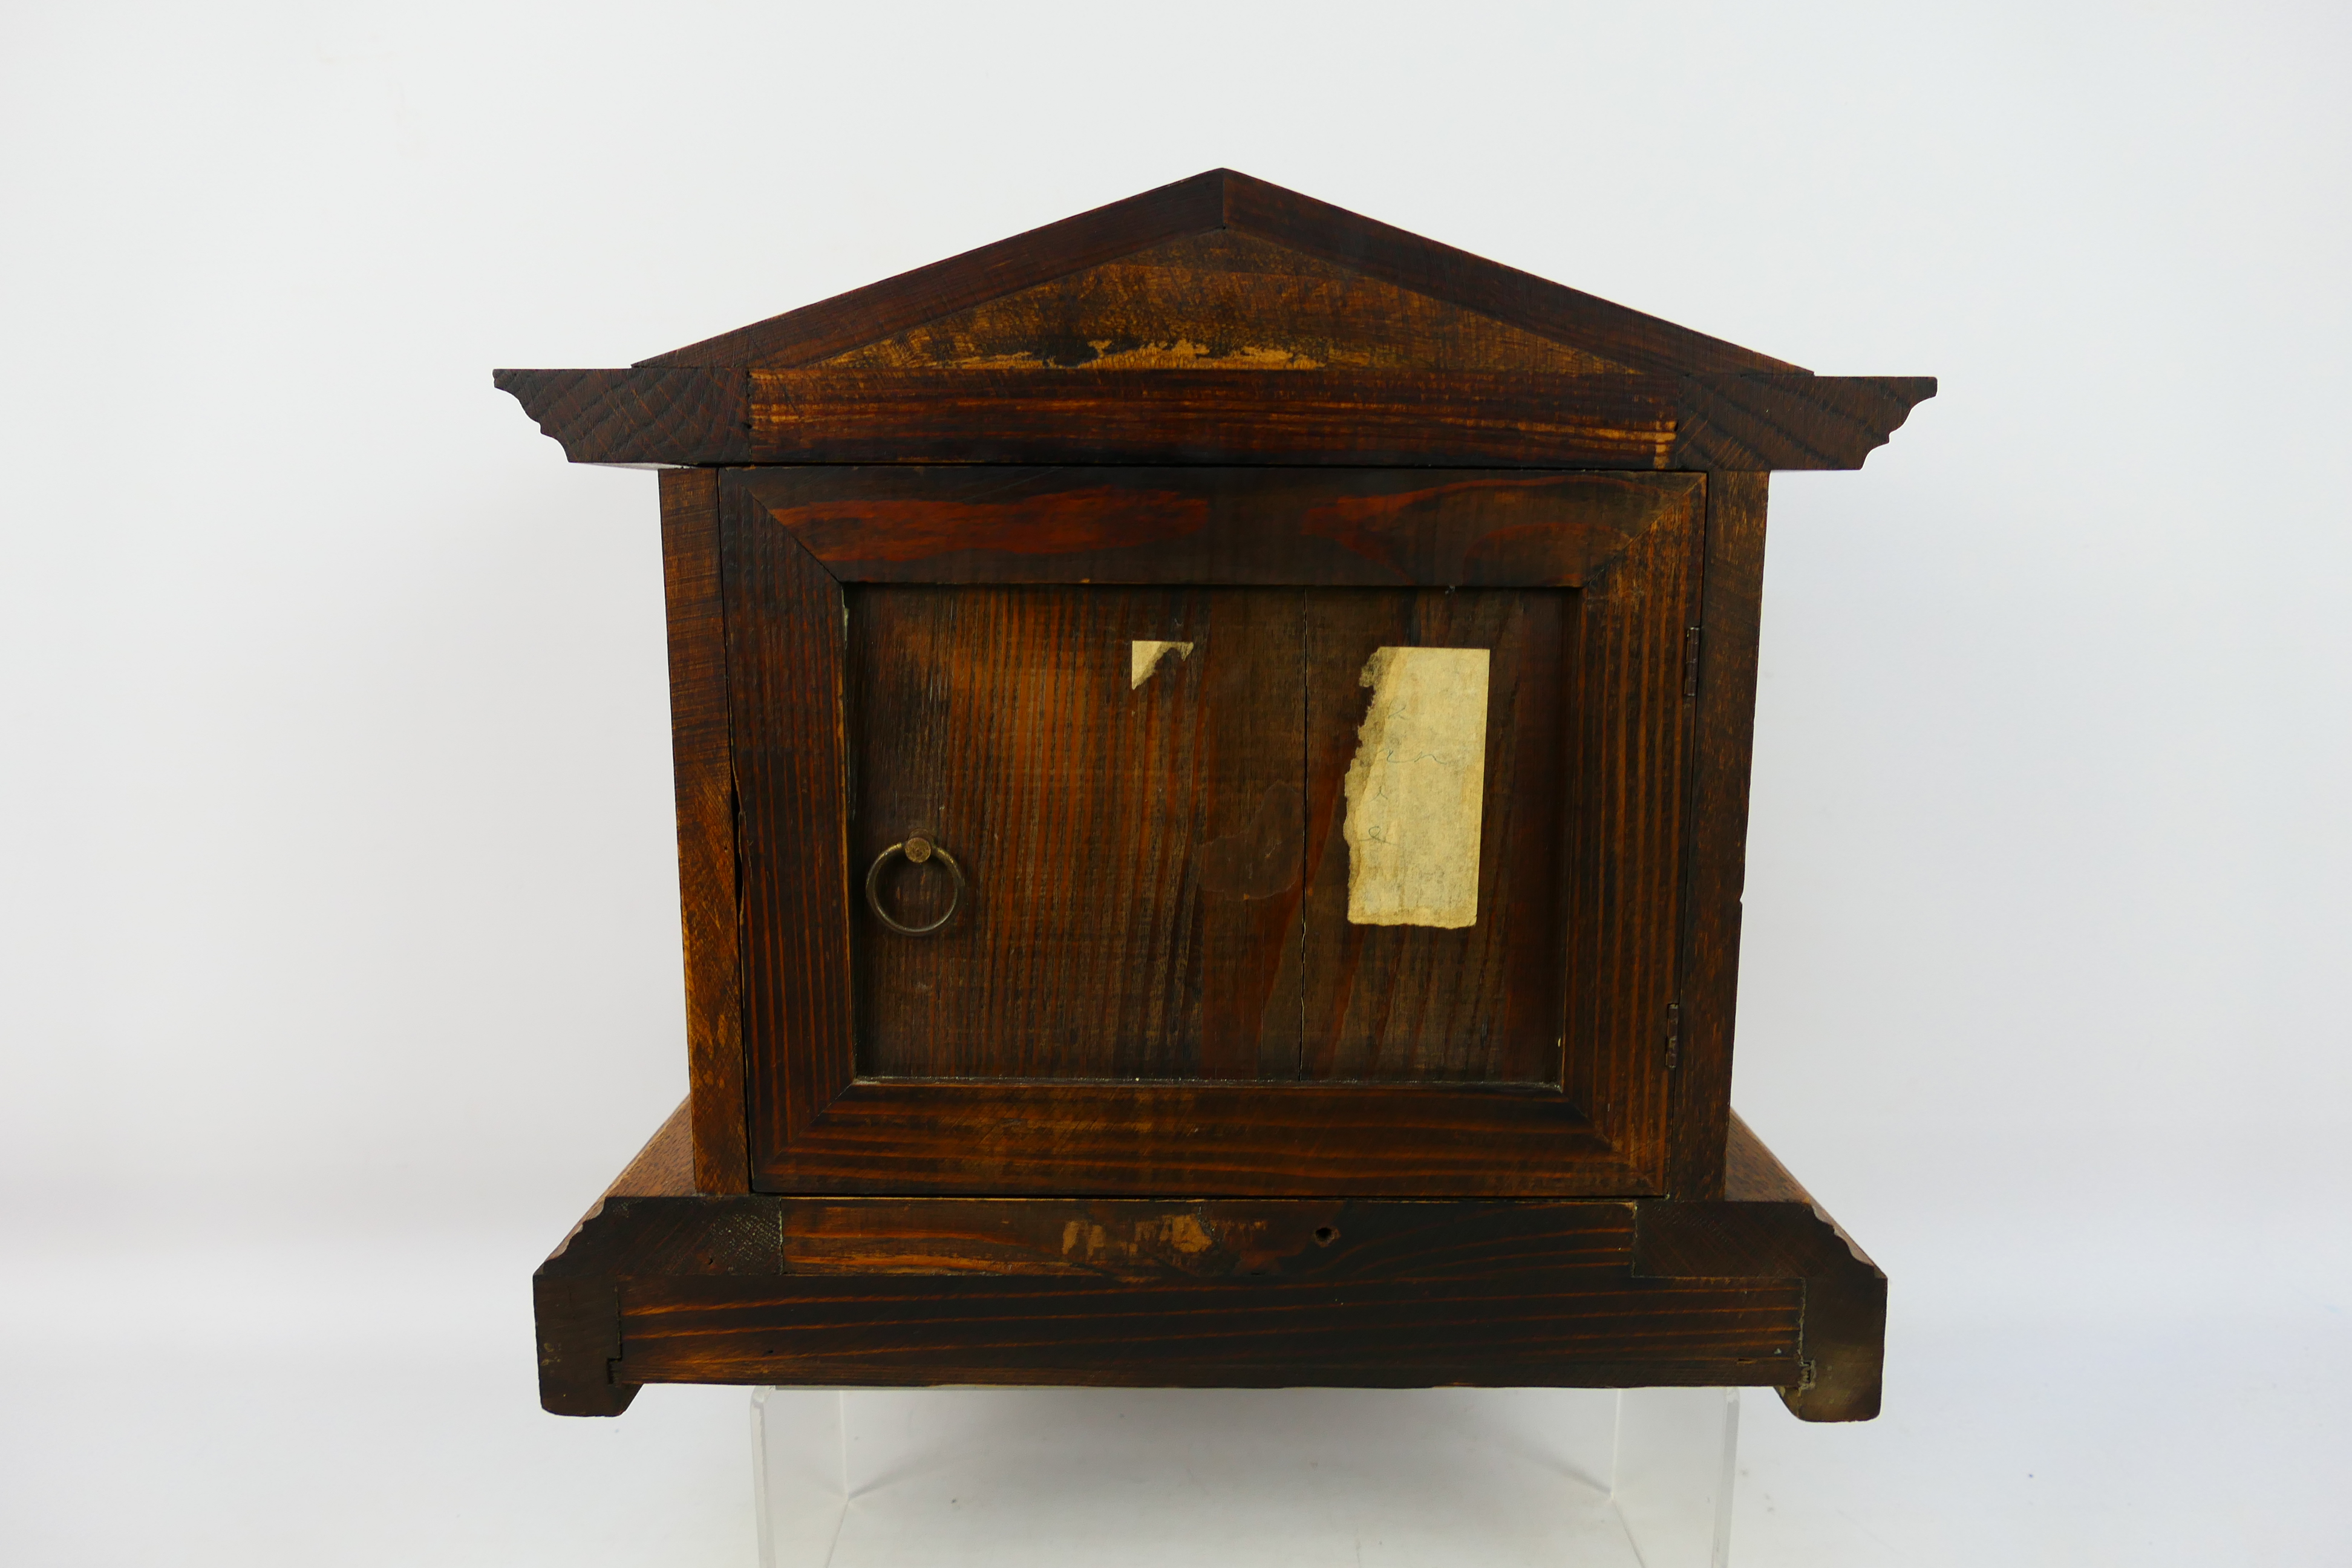 An early 20th century oak cased mantel clock of architectural form, - Image 5 of 9